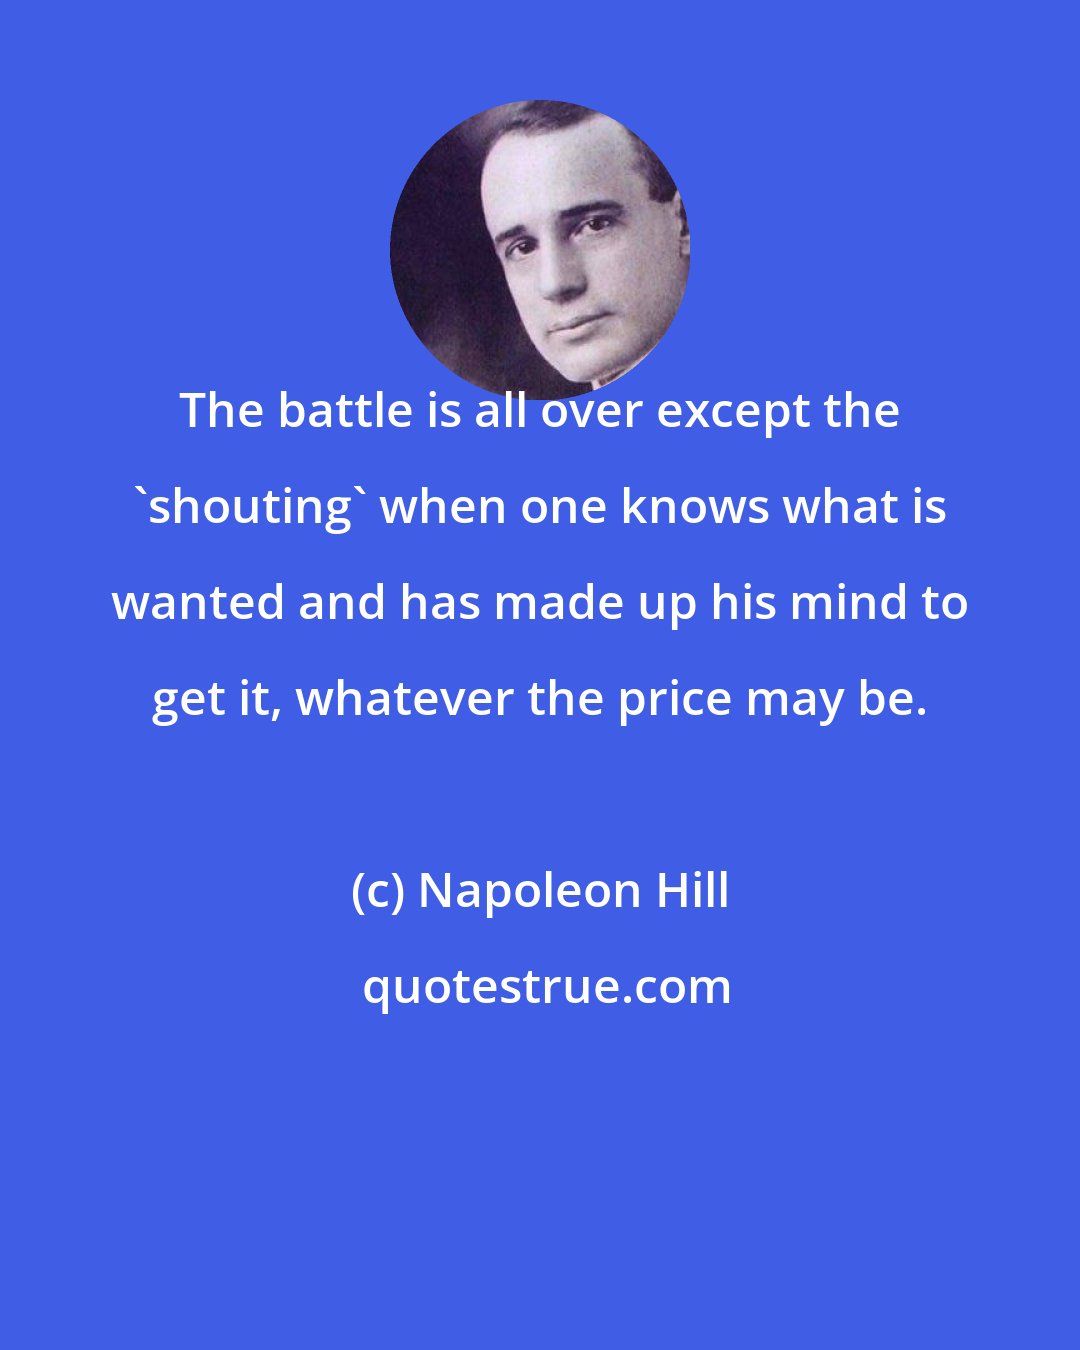 Napoleon Hill: The battle is all over except the 'shouting' when one knows what is wanted and has made up his mind to get it, whatever the price may be.